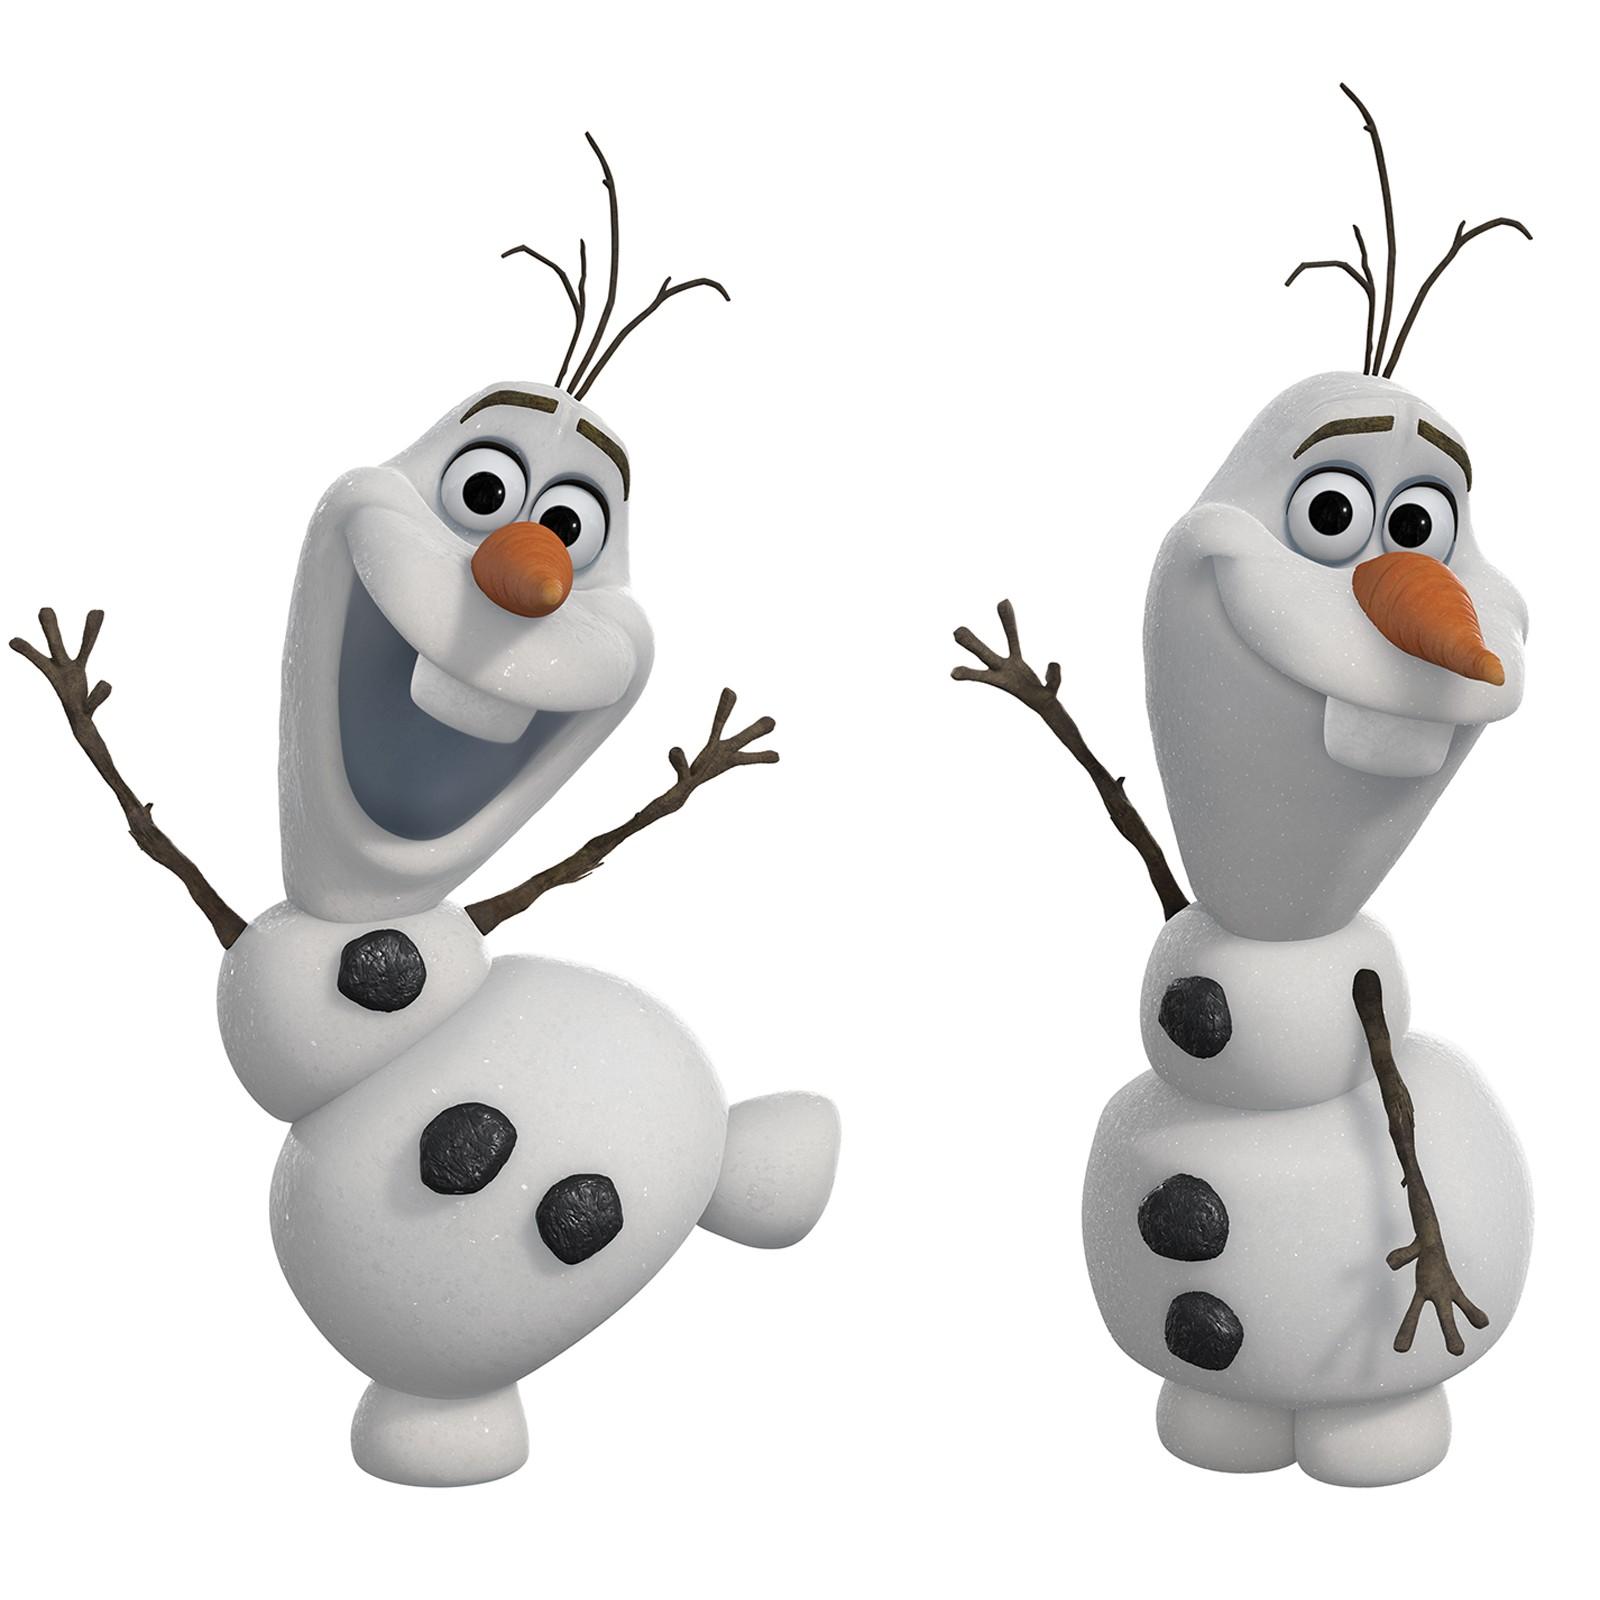 Disney Frozen Olaf The Snowman Peel And Stick Wall Decals